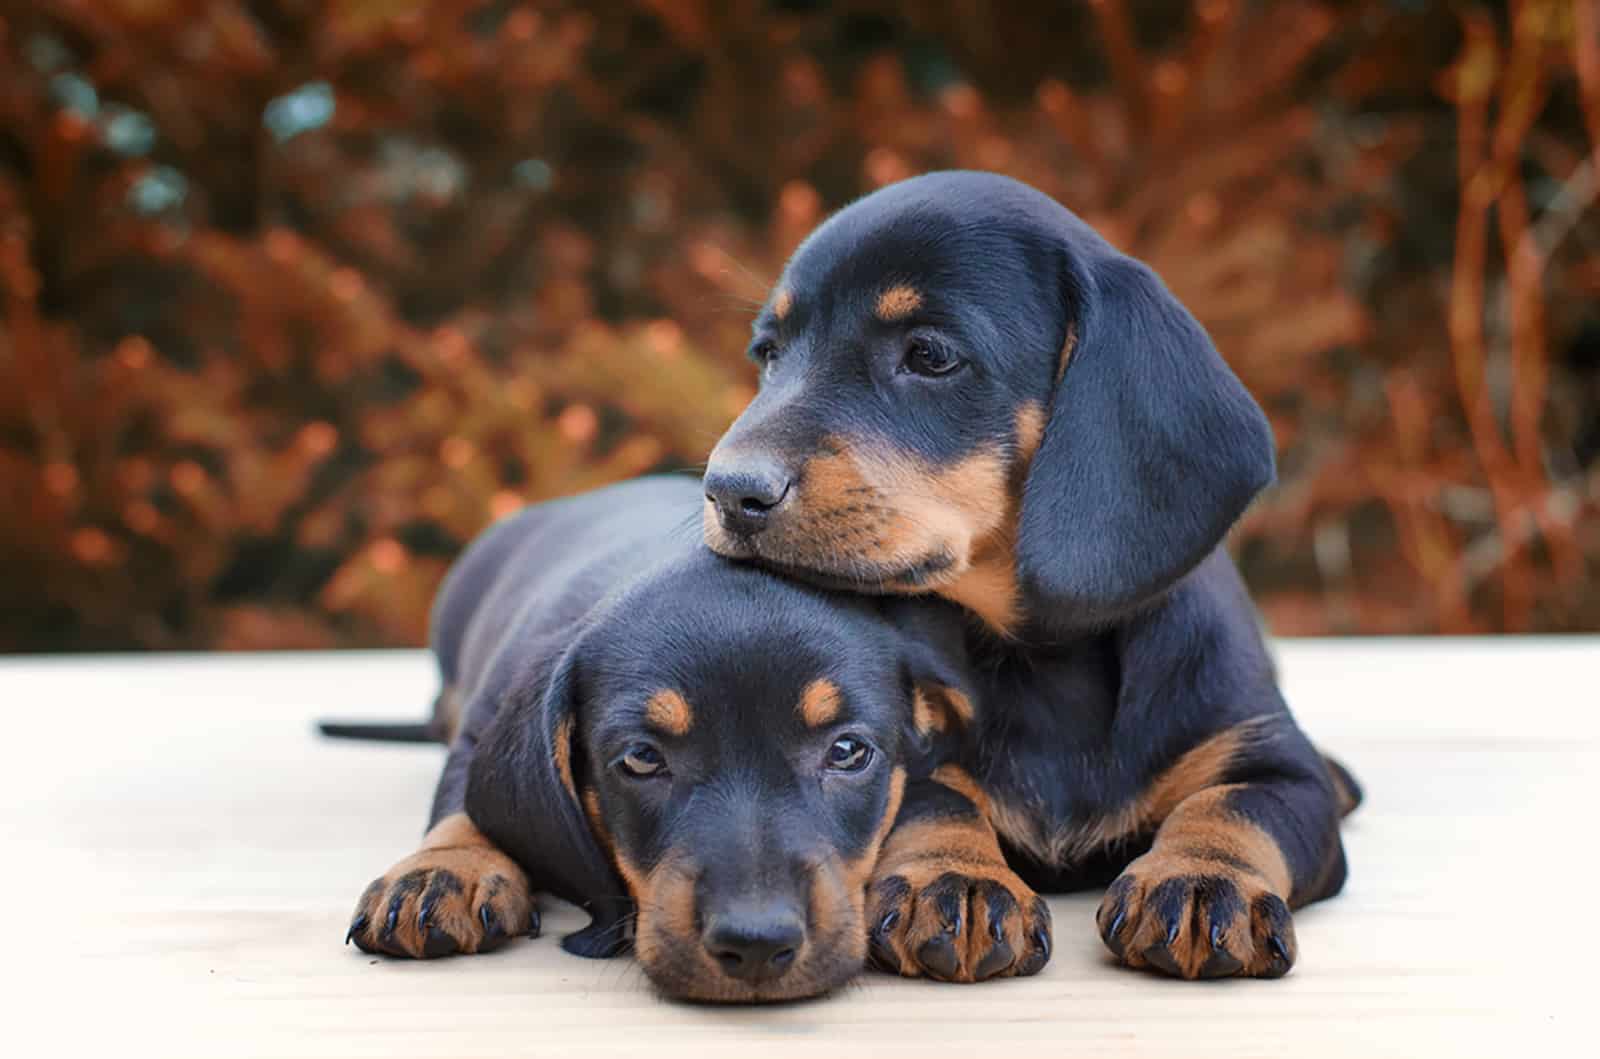 two dachshund puppies lying together